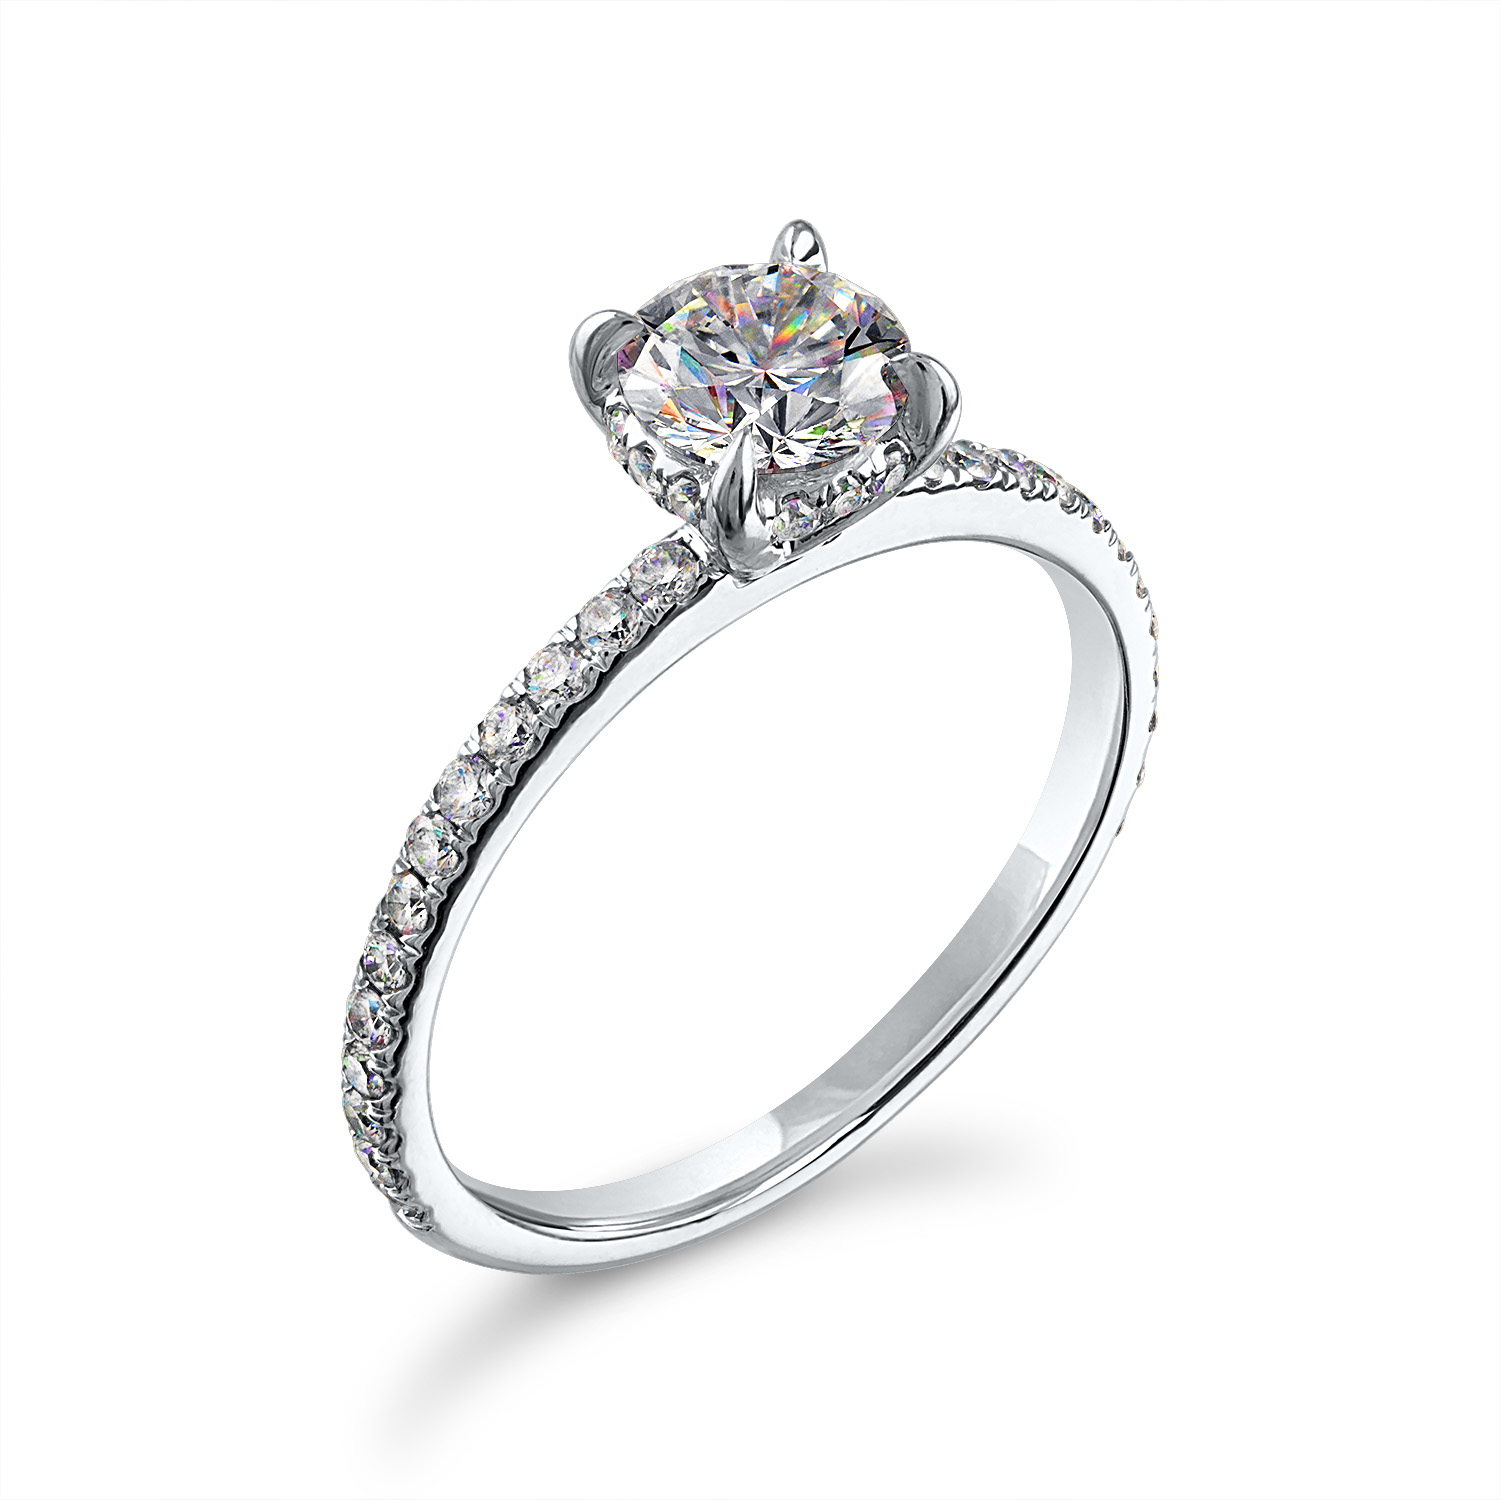 Facets of Fire Diamond Engagement Ring with Hidden Halo